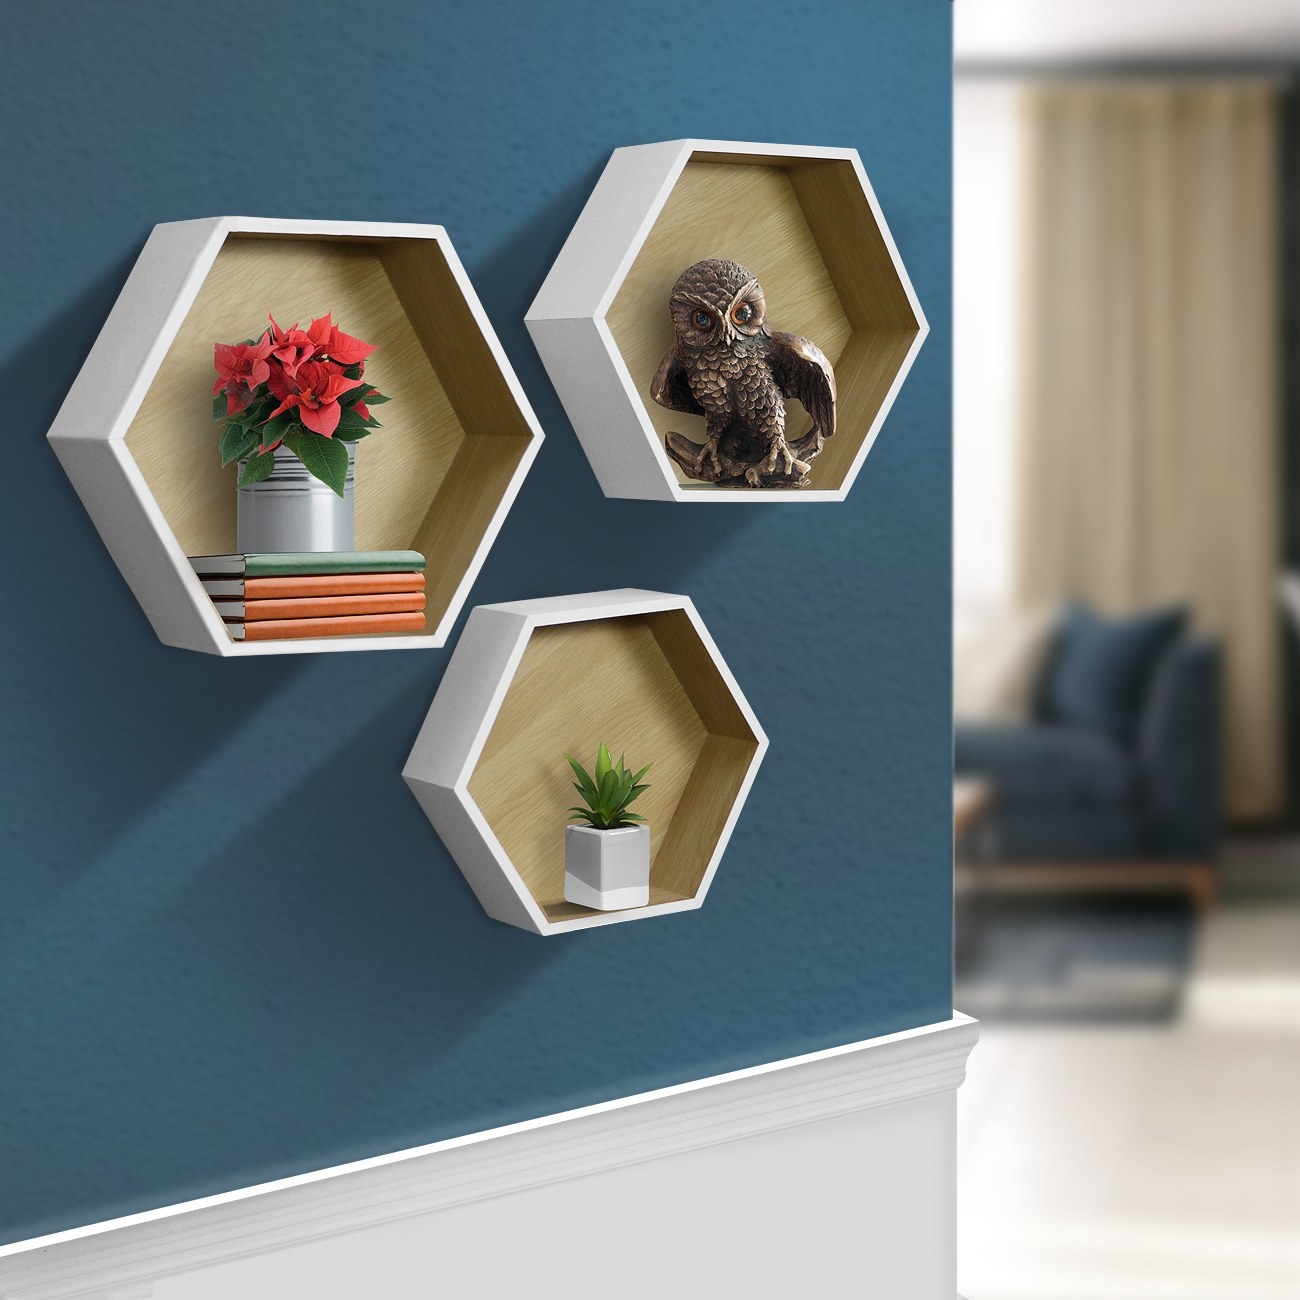 The hexagon-shaped shelves hanging on a wall